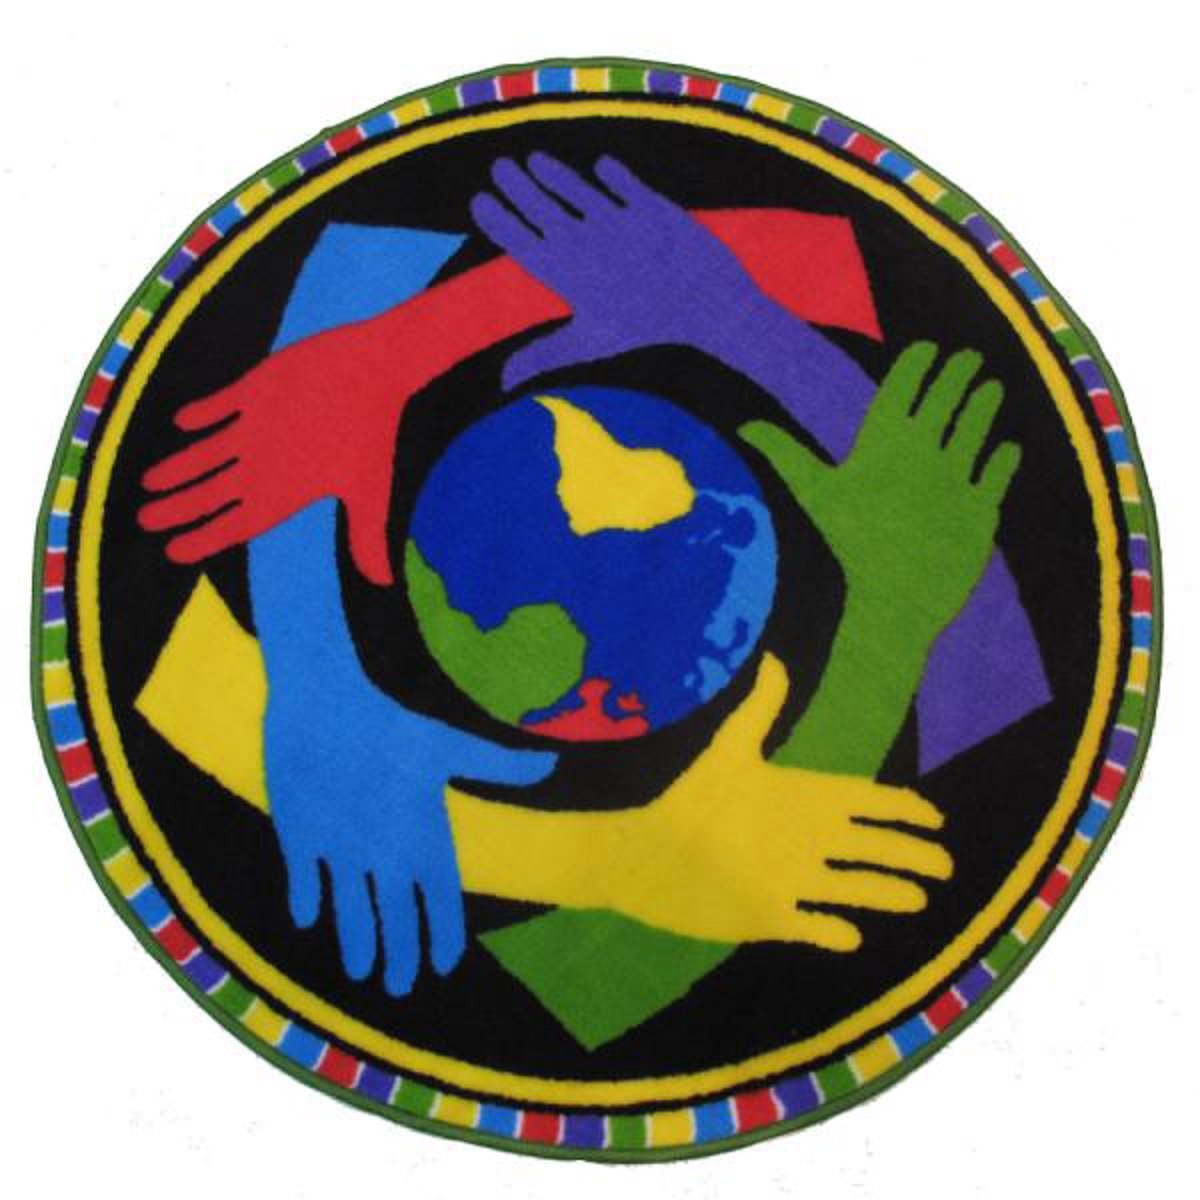 39 In. Round Fun Time Shapes-hands Around The World, Medium Pile Childrens Area Rug